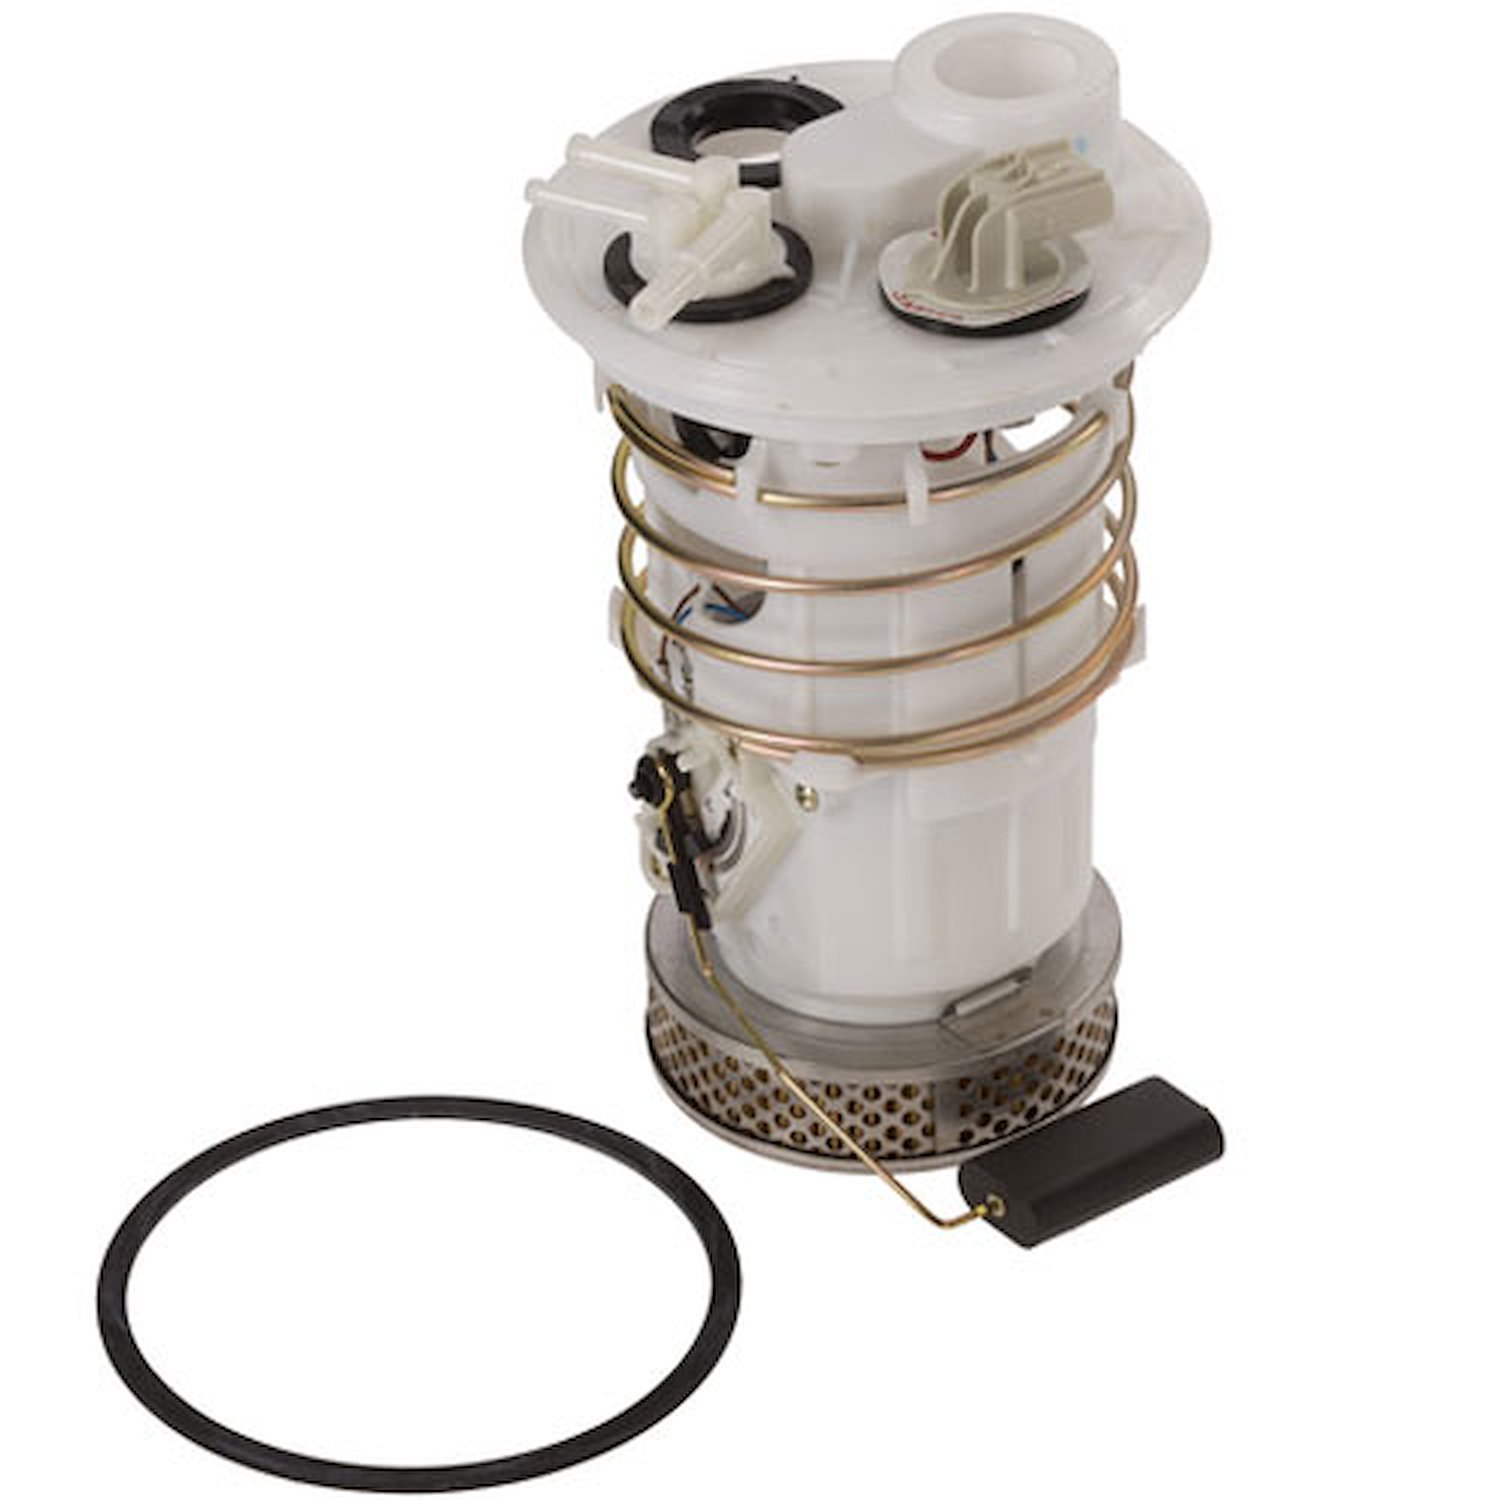 OE Chrysler/Dodge Replacement Electric Fuel Pump Module Assembly 1992-95 Chrysler Town & Country 3.3L/3.8L V6